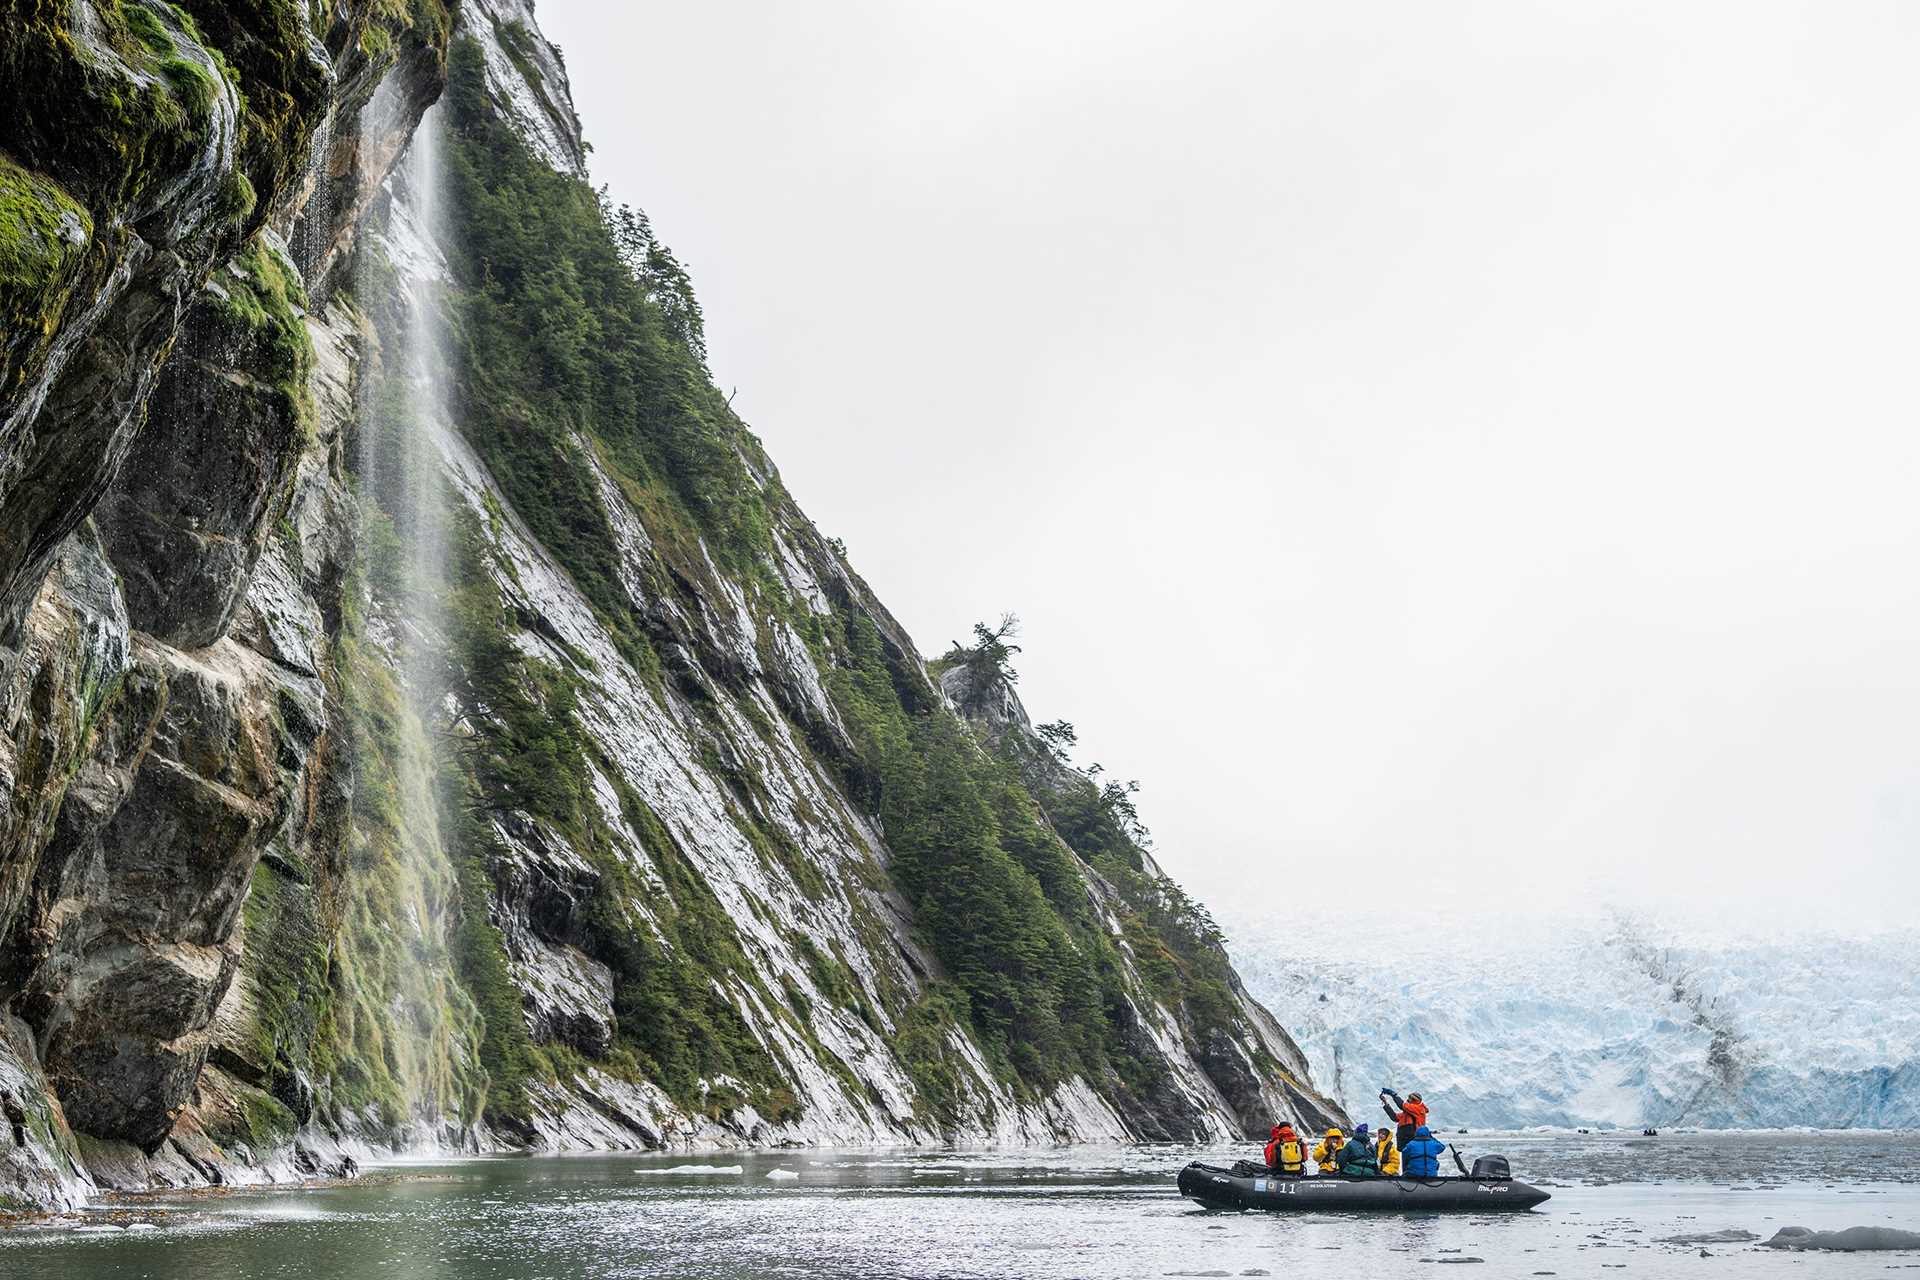 Guests in a Zodiac photograph a waterfall in Beagle Channel, Patagonia.